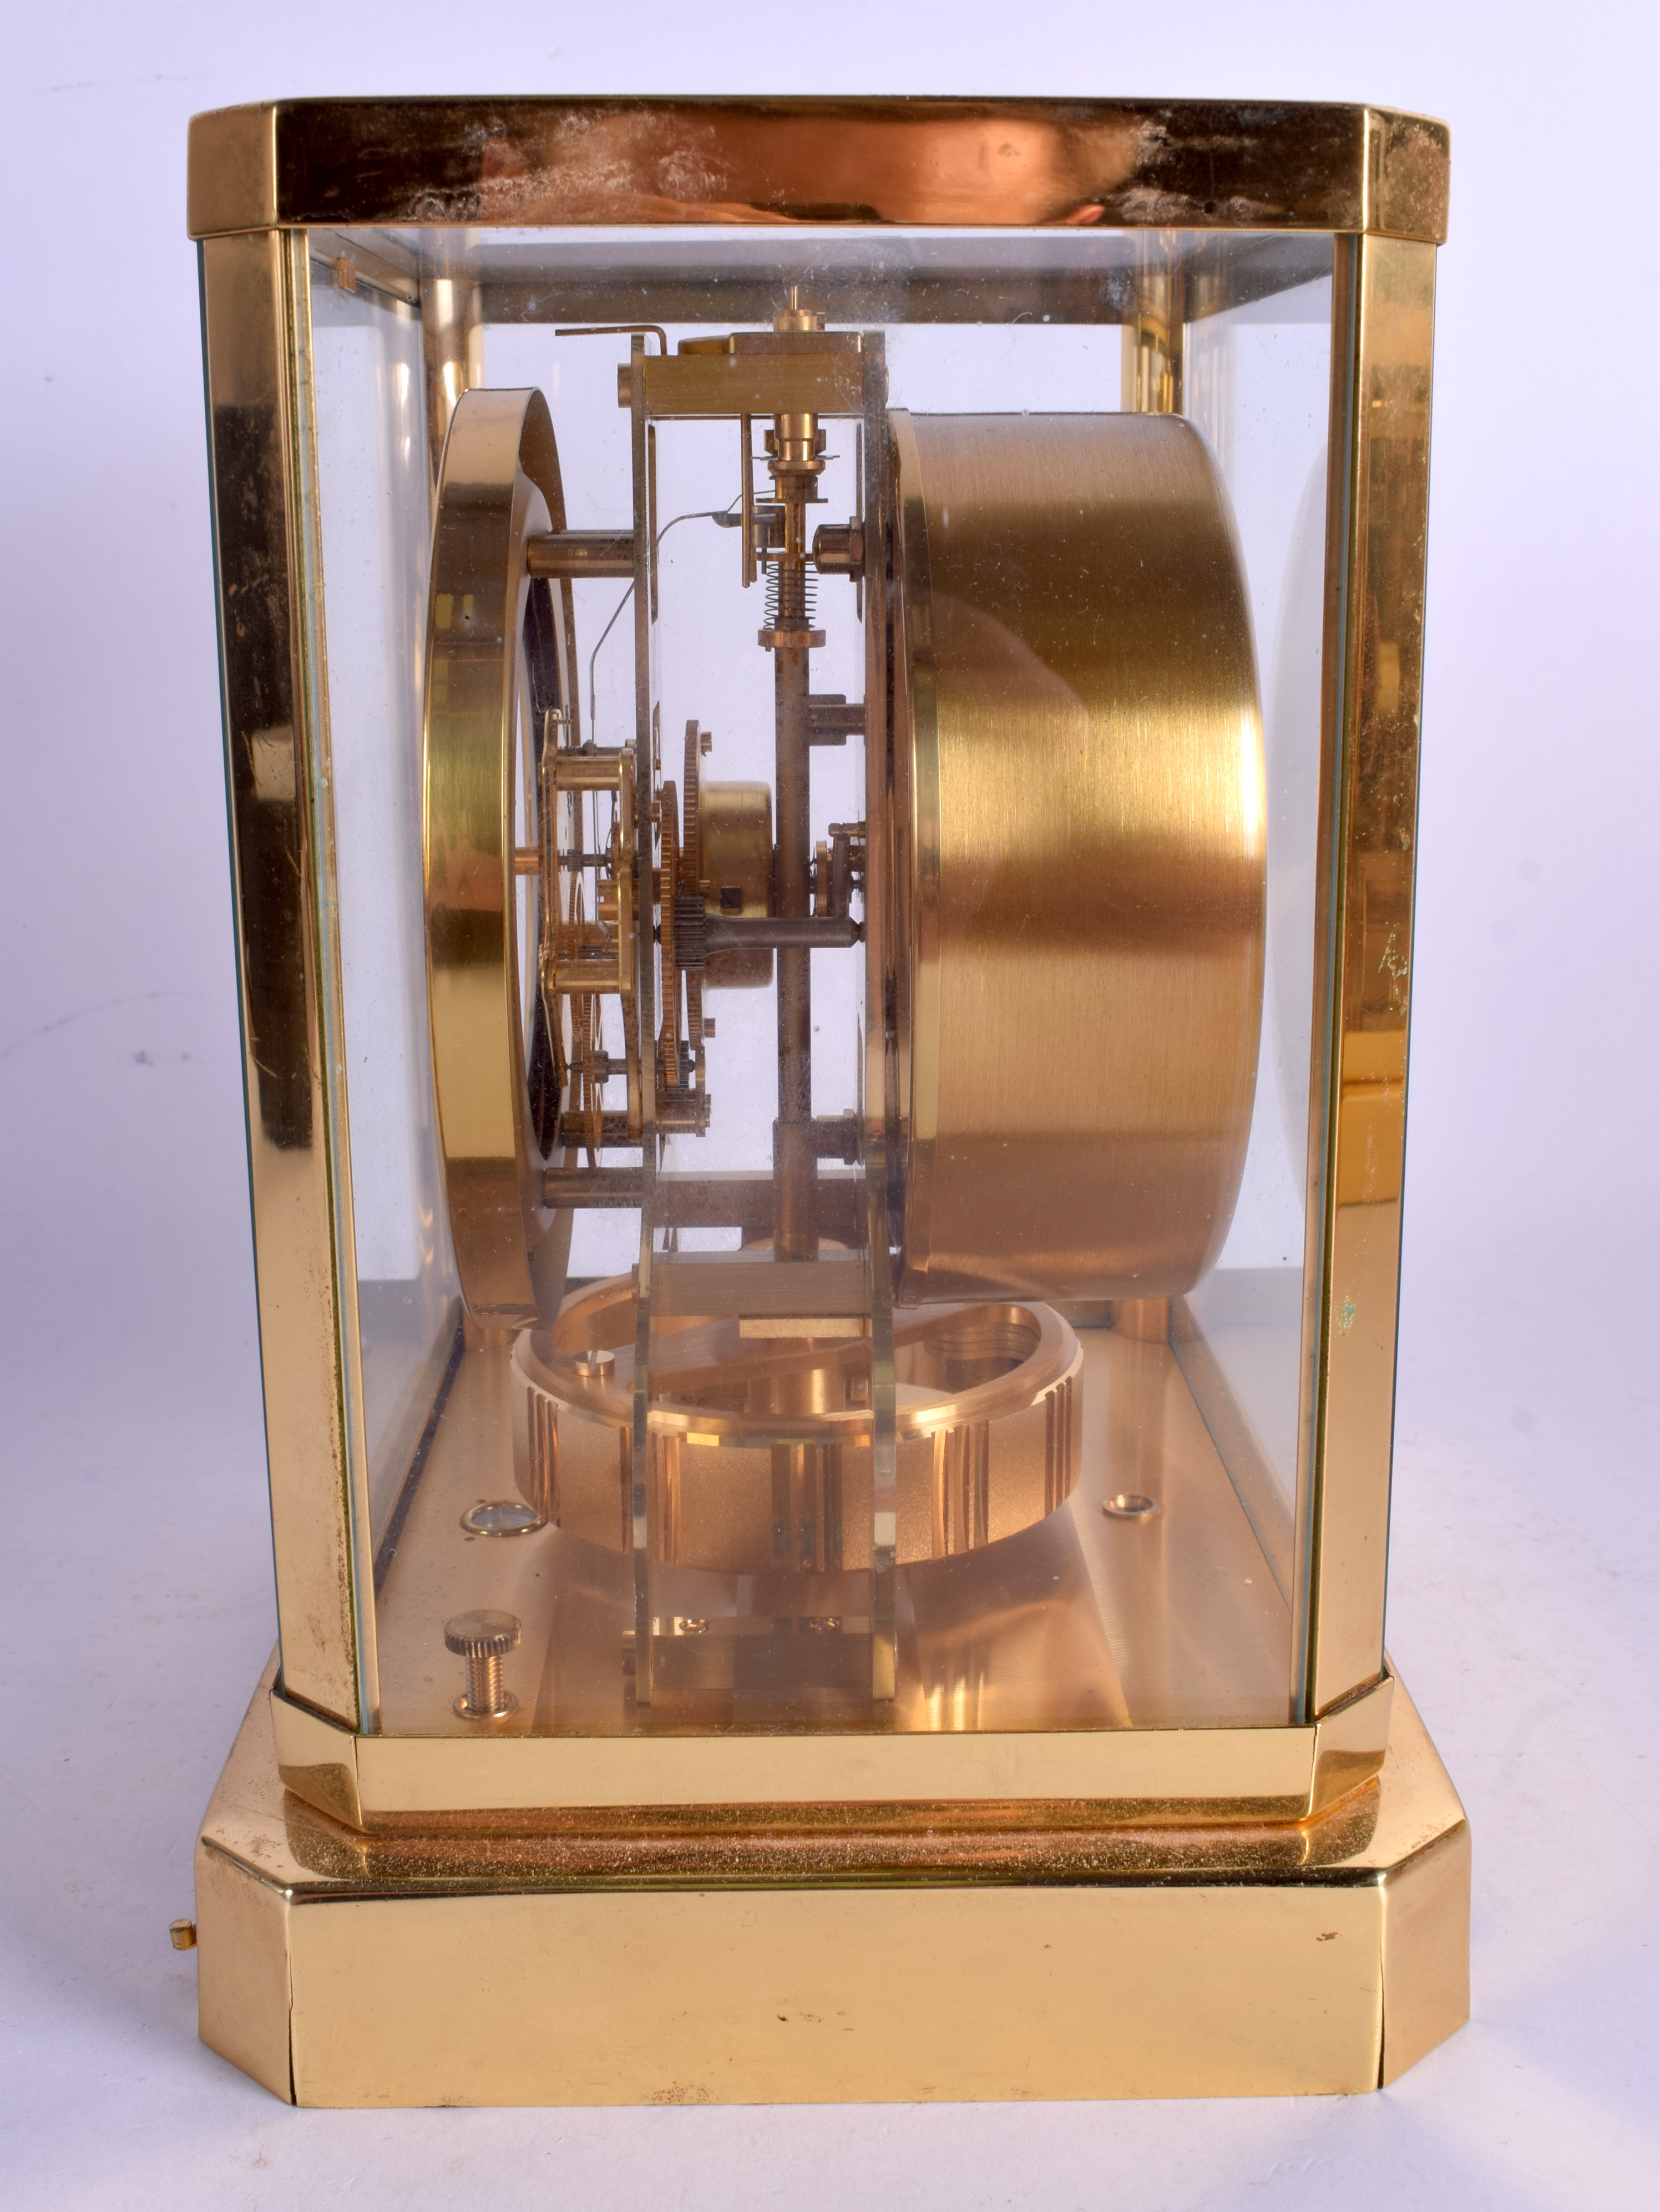 A JAEGER LE COULTER BRASS ATMOS CLOCK No. 317029. 23 cm x 19 cm. - Image 2 of 4